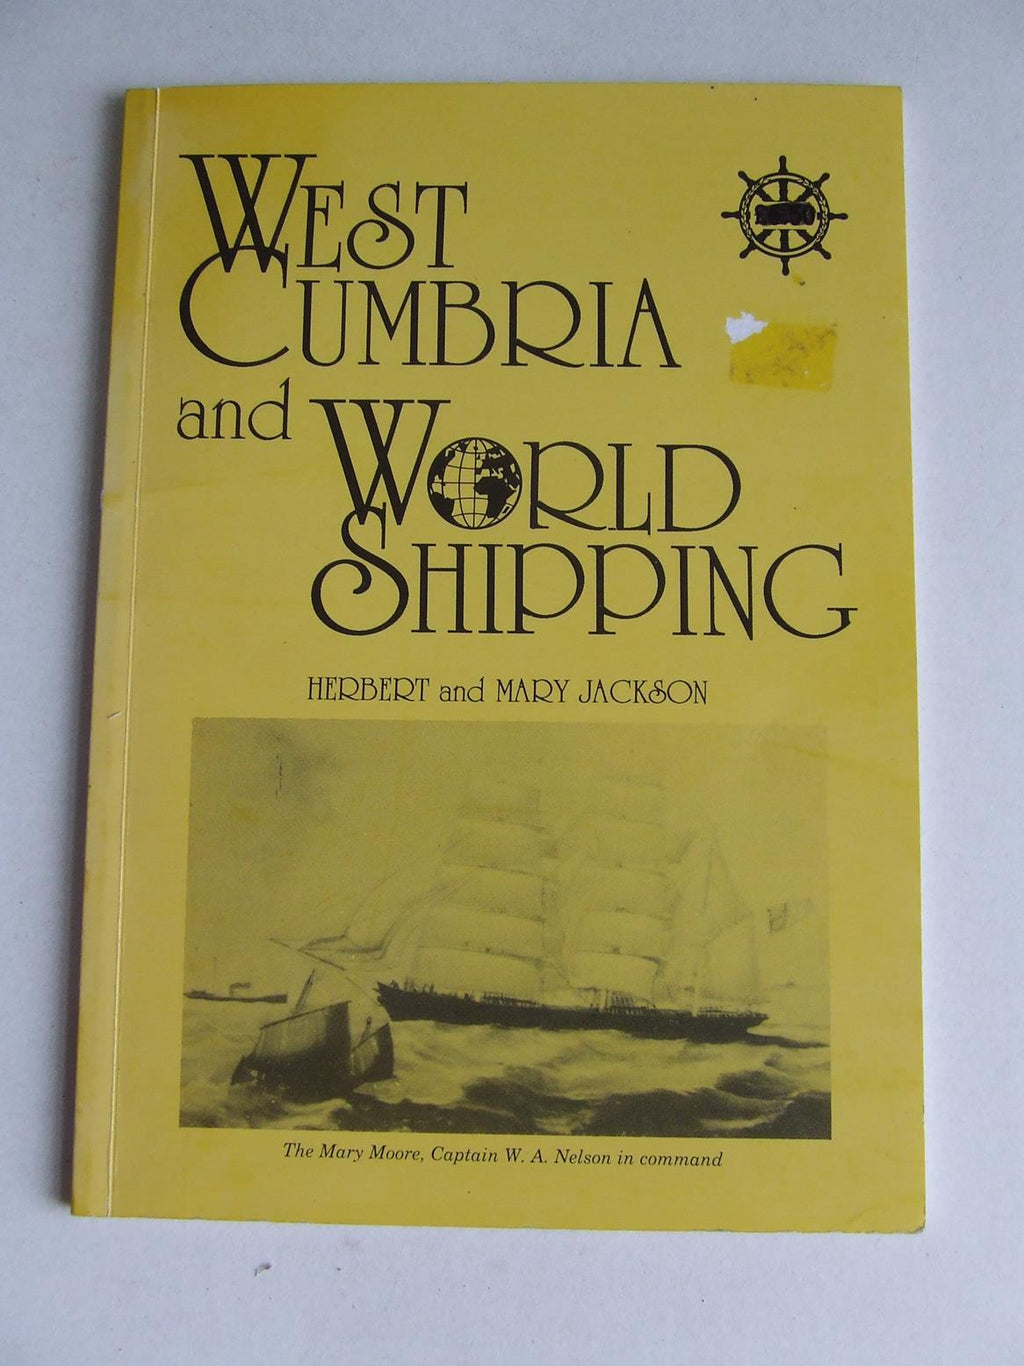 West Cumbria and World Shipping